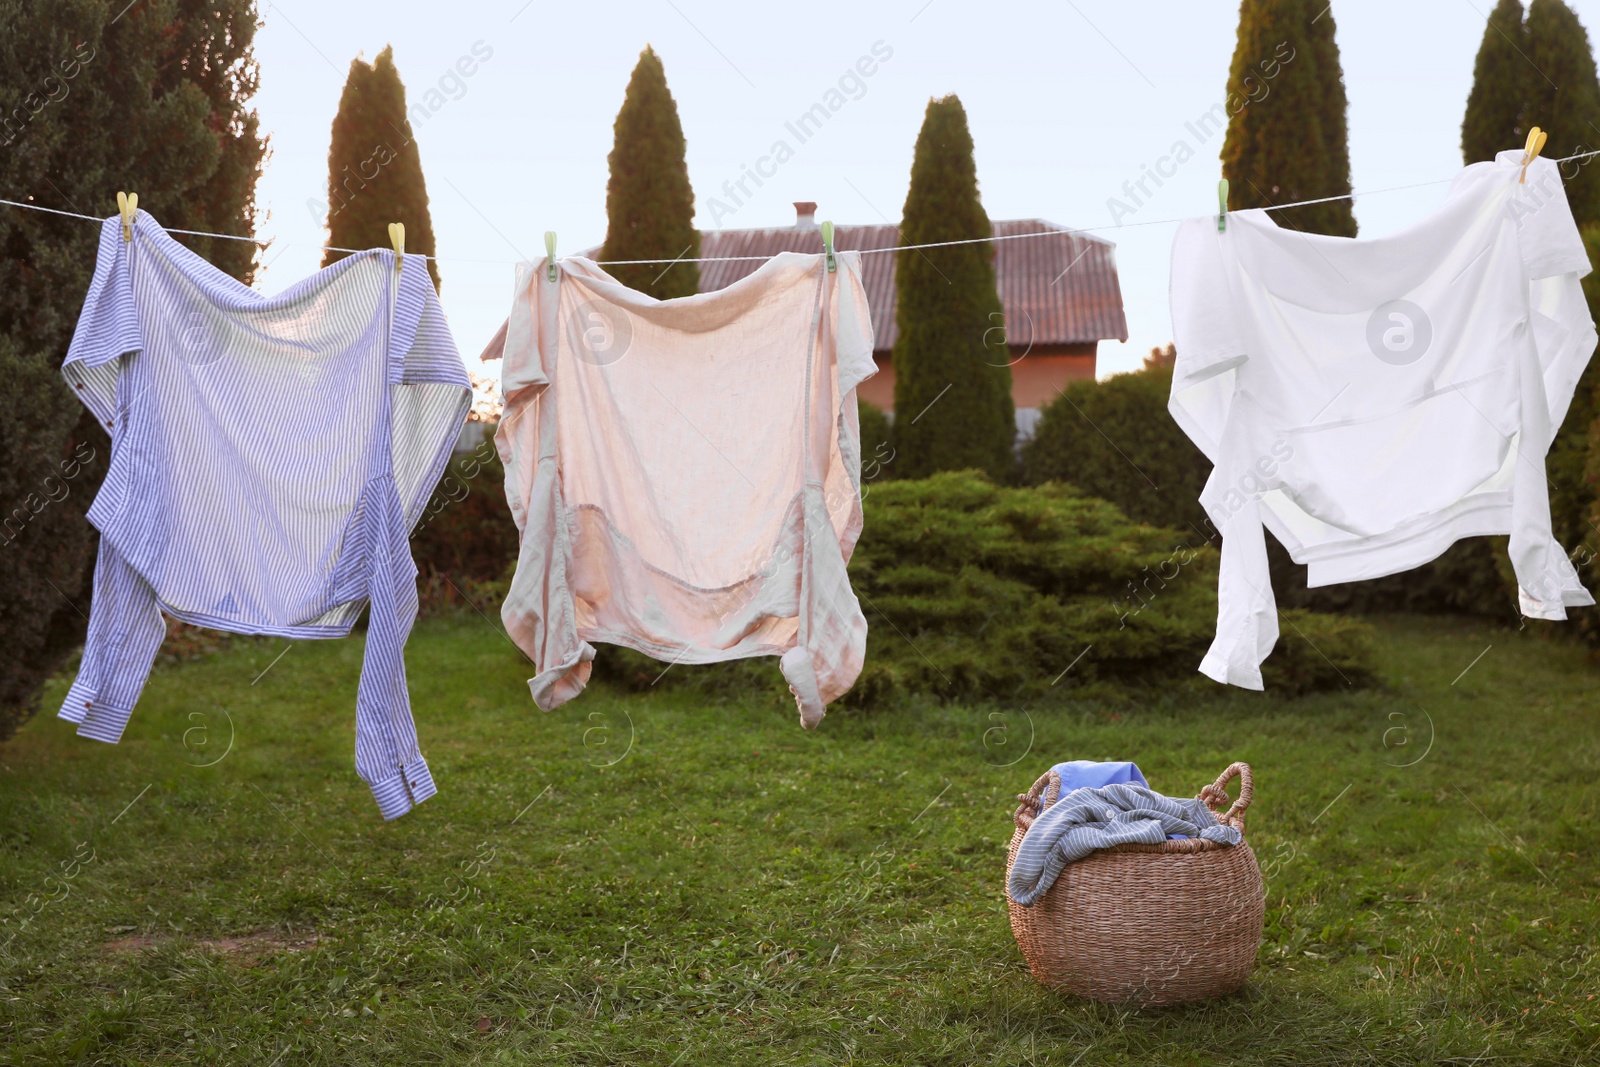 Photo of Clean clothes drying near wicker bag in backyard